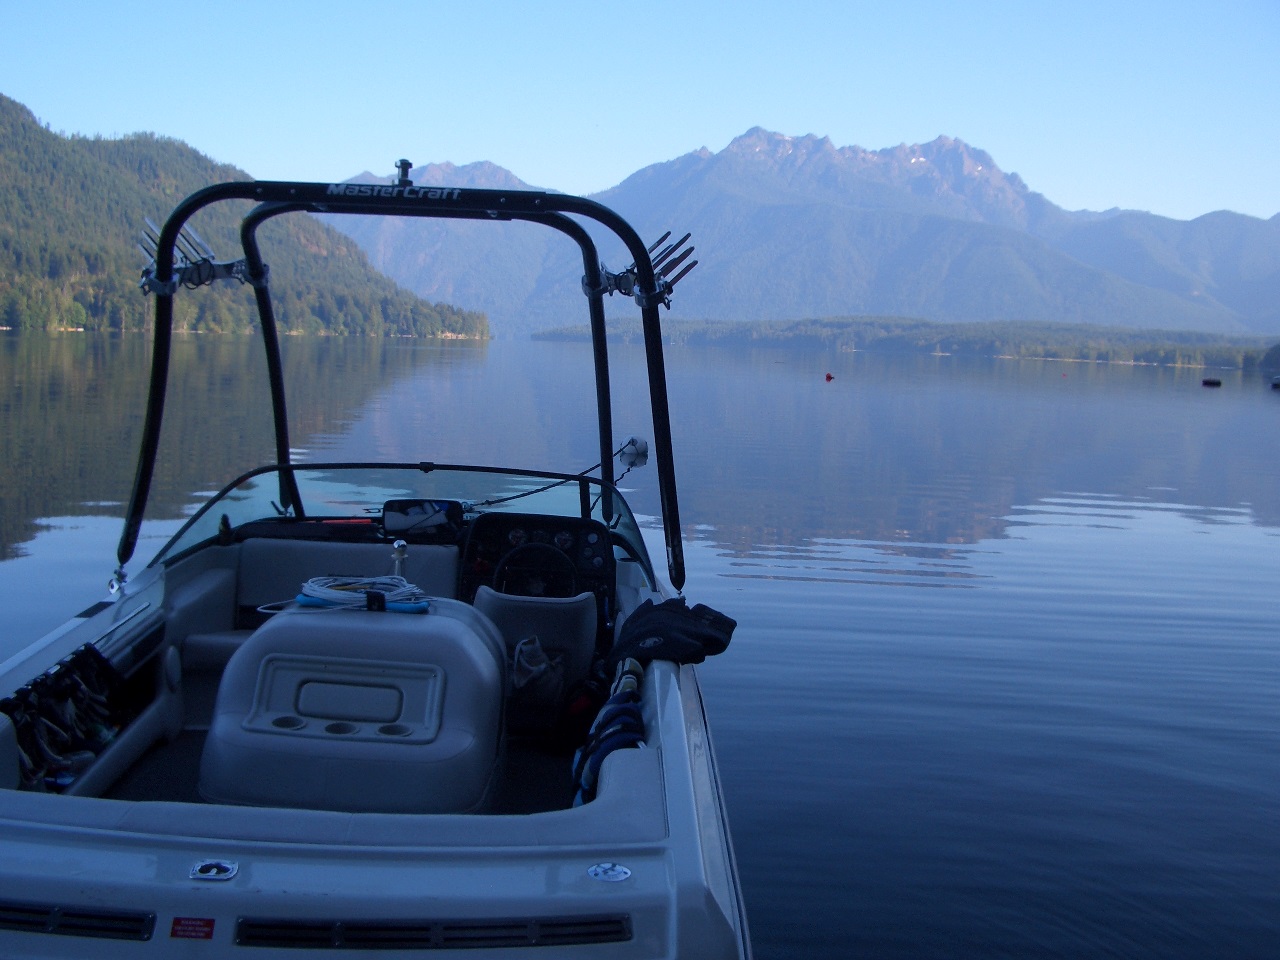 Wakeboard boat on lake with great view of the Olympic Mountains